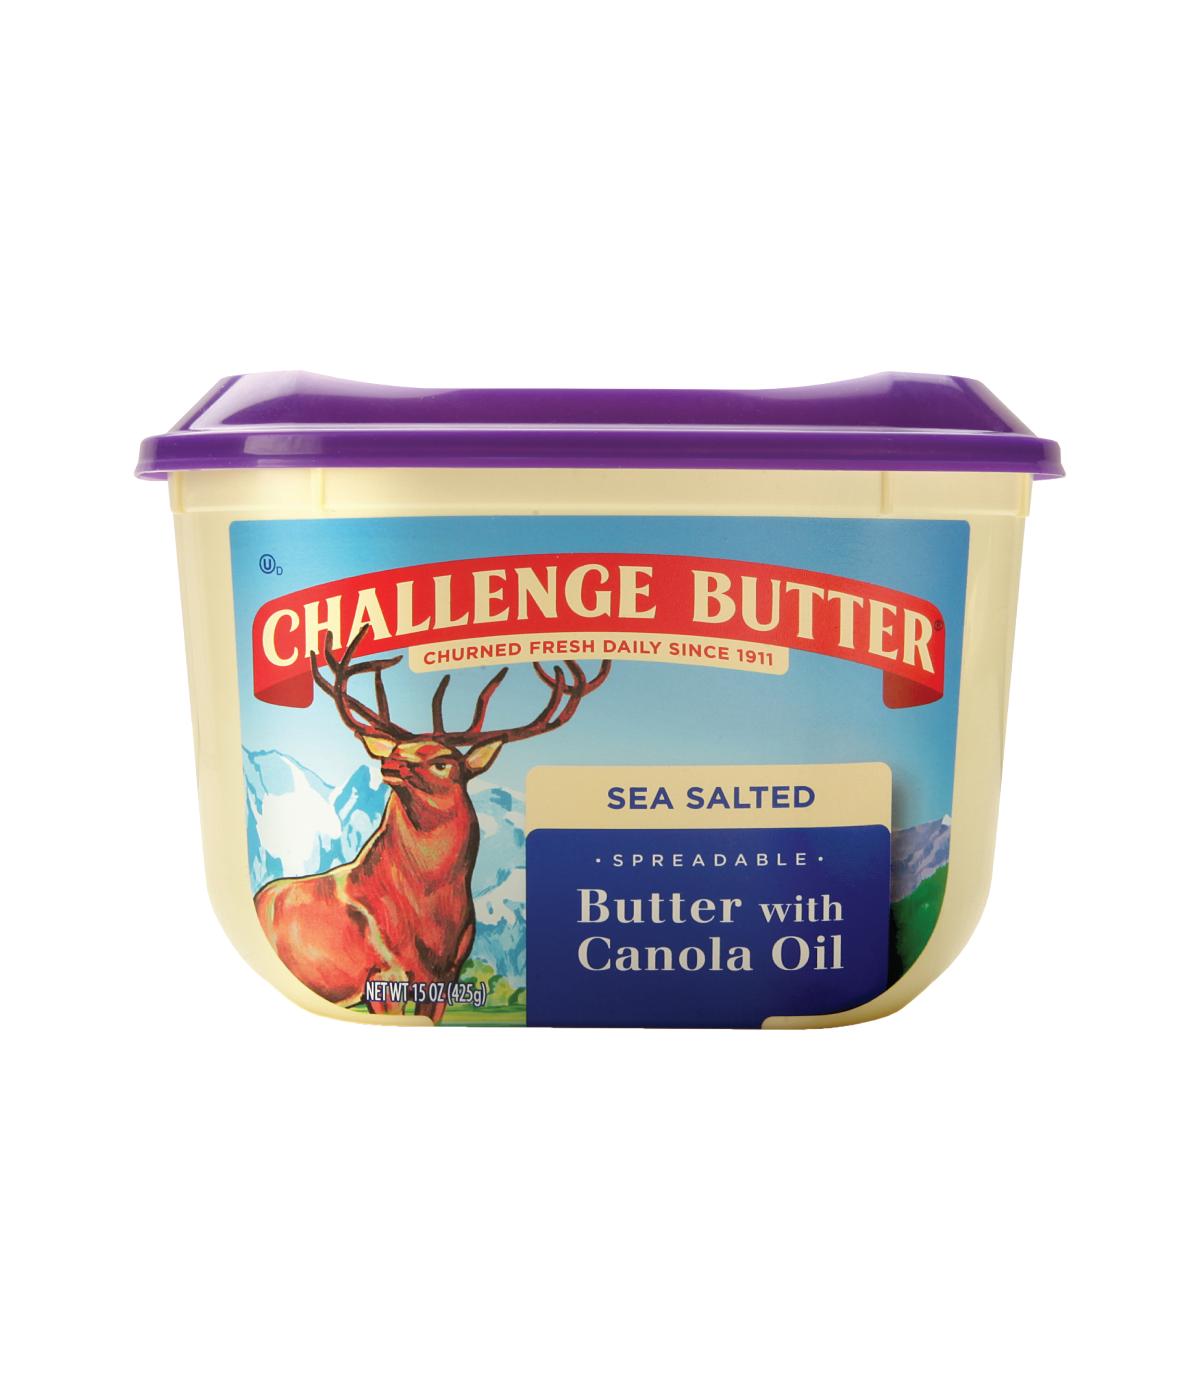 Challenge Spreadable Butter with Canola Oil; image 1 of 4